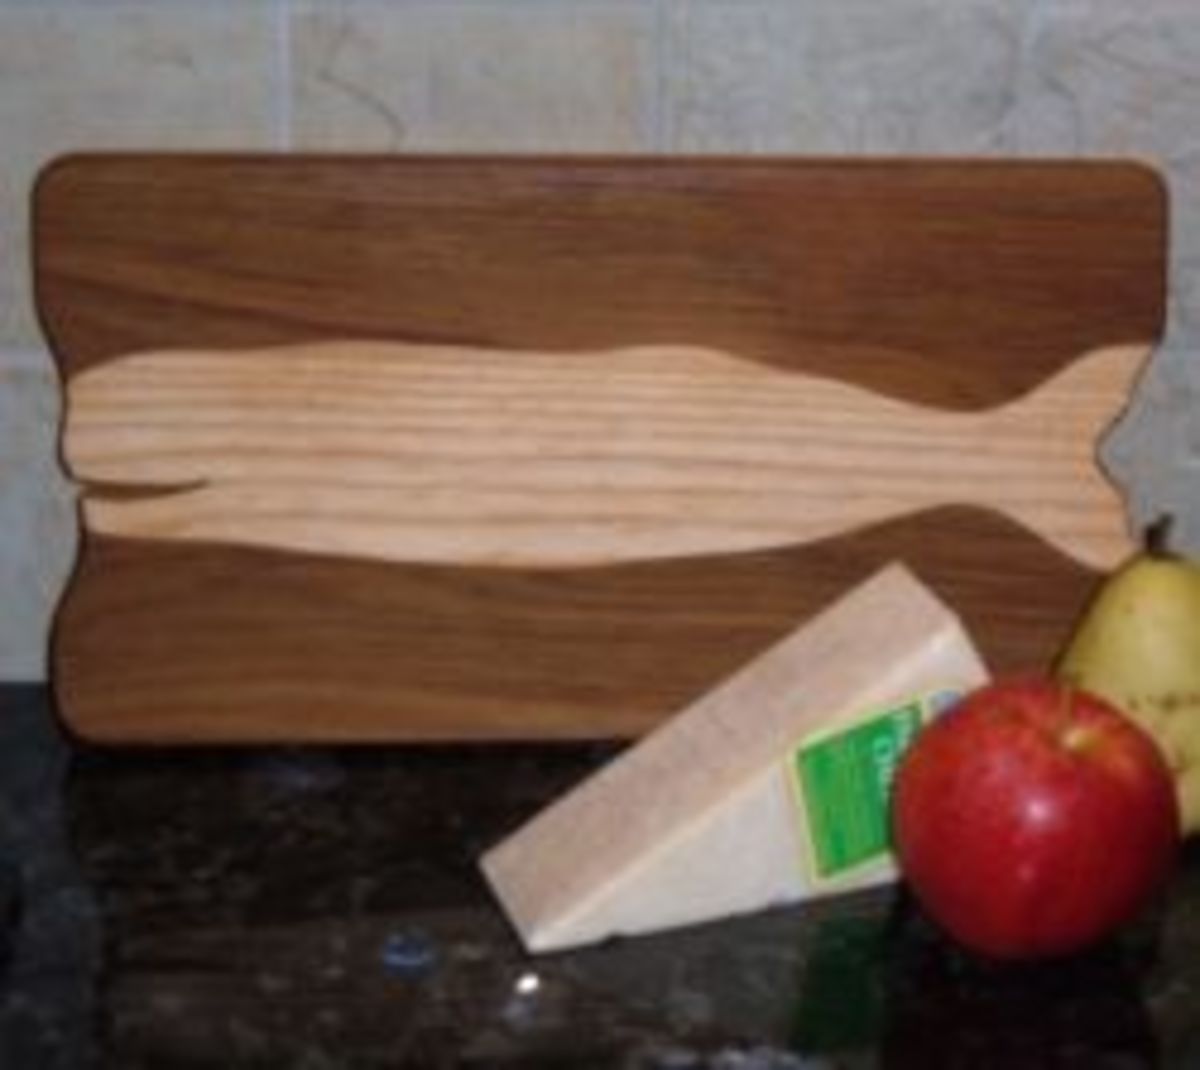 How to Make a Wooden Cutting Board: Whale Cutting Board Plans